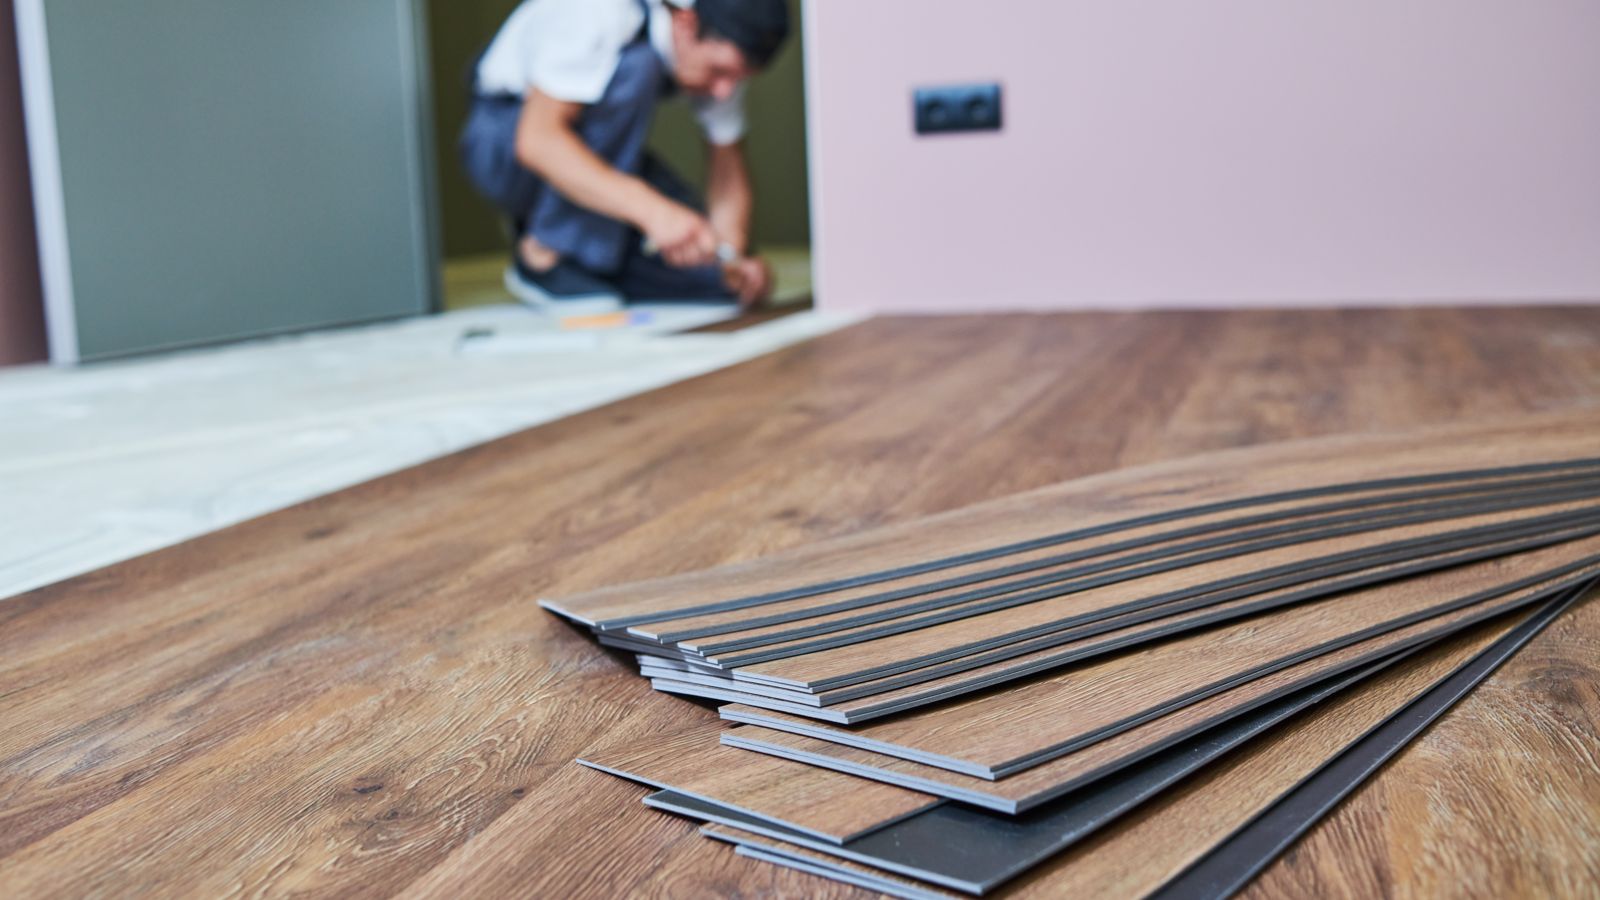 <p>Many people want new flooring but can’t put up with the hassle of installing it. They’d rather move into a house that’s already had the work done. According to <a href="https://www.flooringamerica.com/blog/whats-the-most-popular-flooring-in-new-homes#:~:text=When%20it%20comes%20to%20choosing,is%20both%20practical%20and%20stylish.">Flooring America</a>, luxury vinyl flooring has emerged as the most popular flooring in new homes as it’s both practical and stylish.</p>